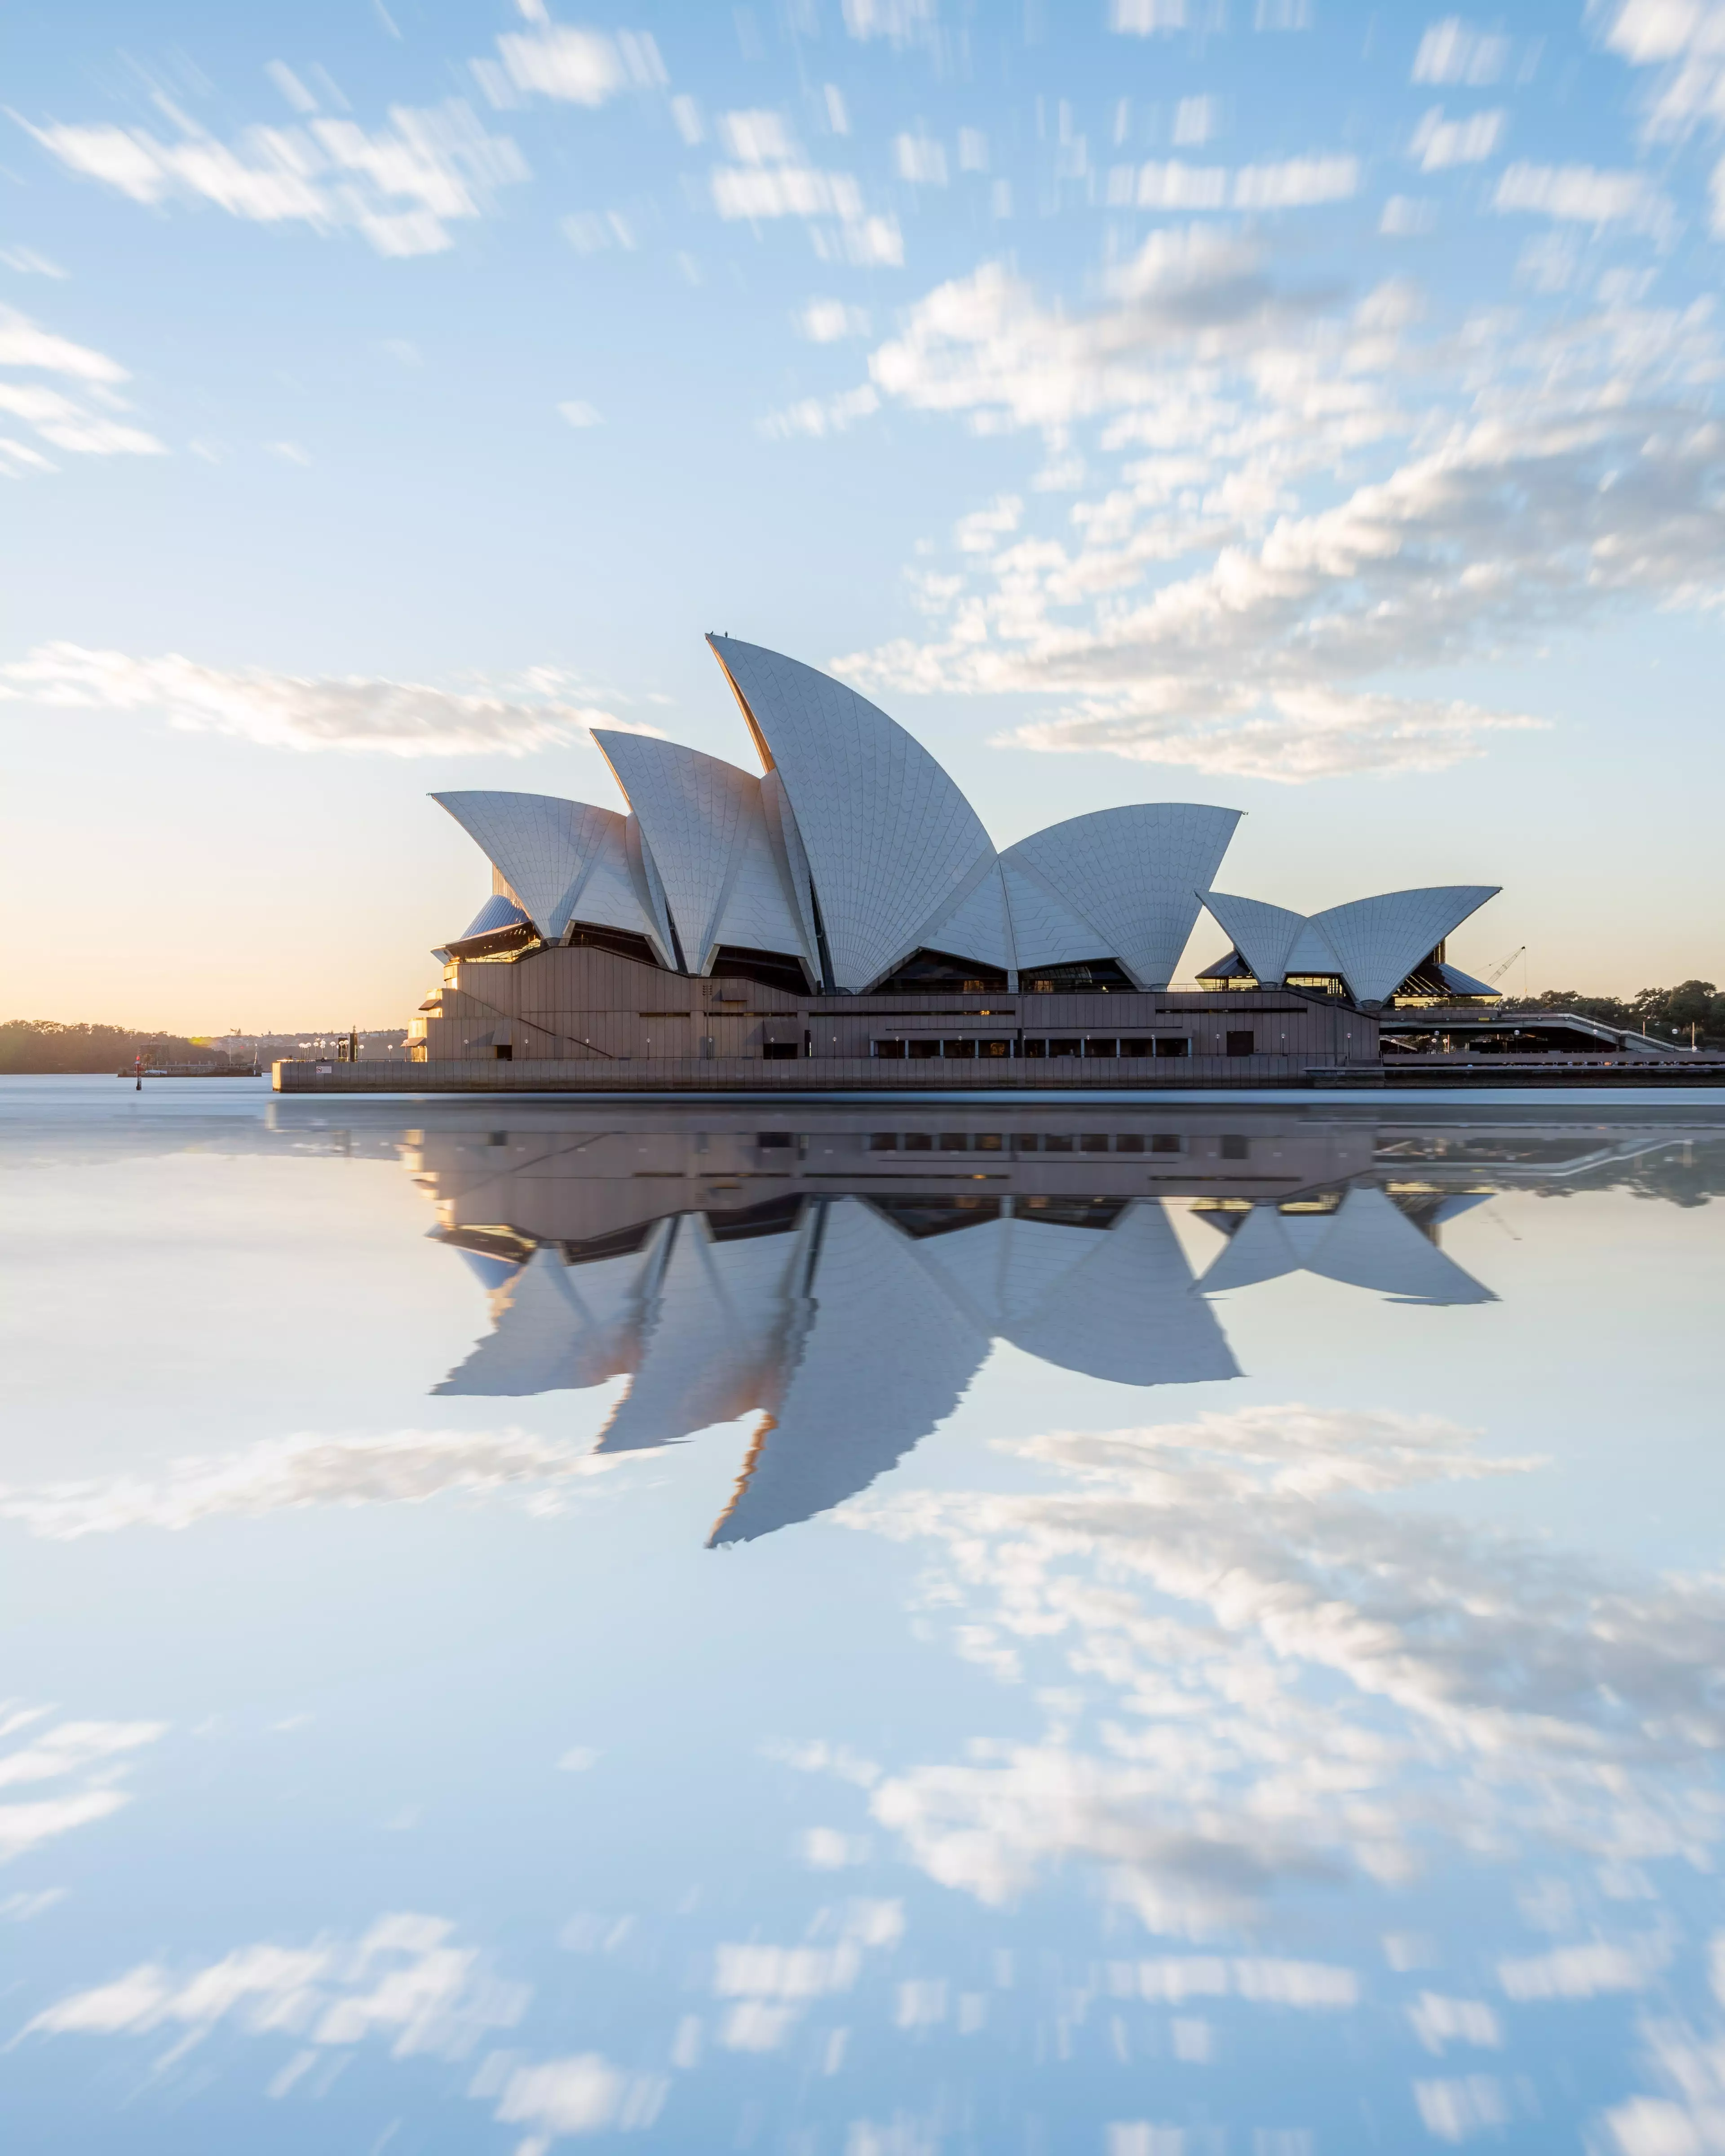 You can fly to Sydney for £414.